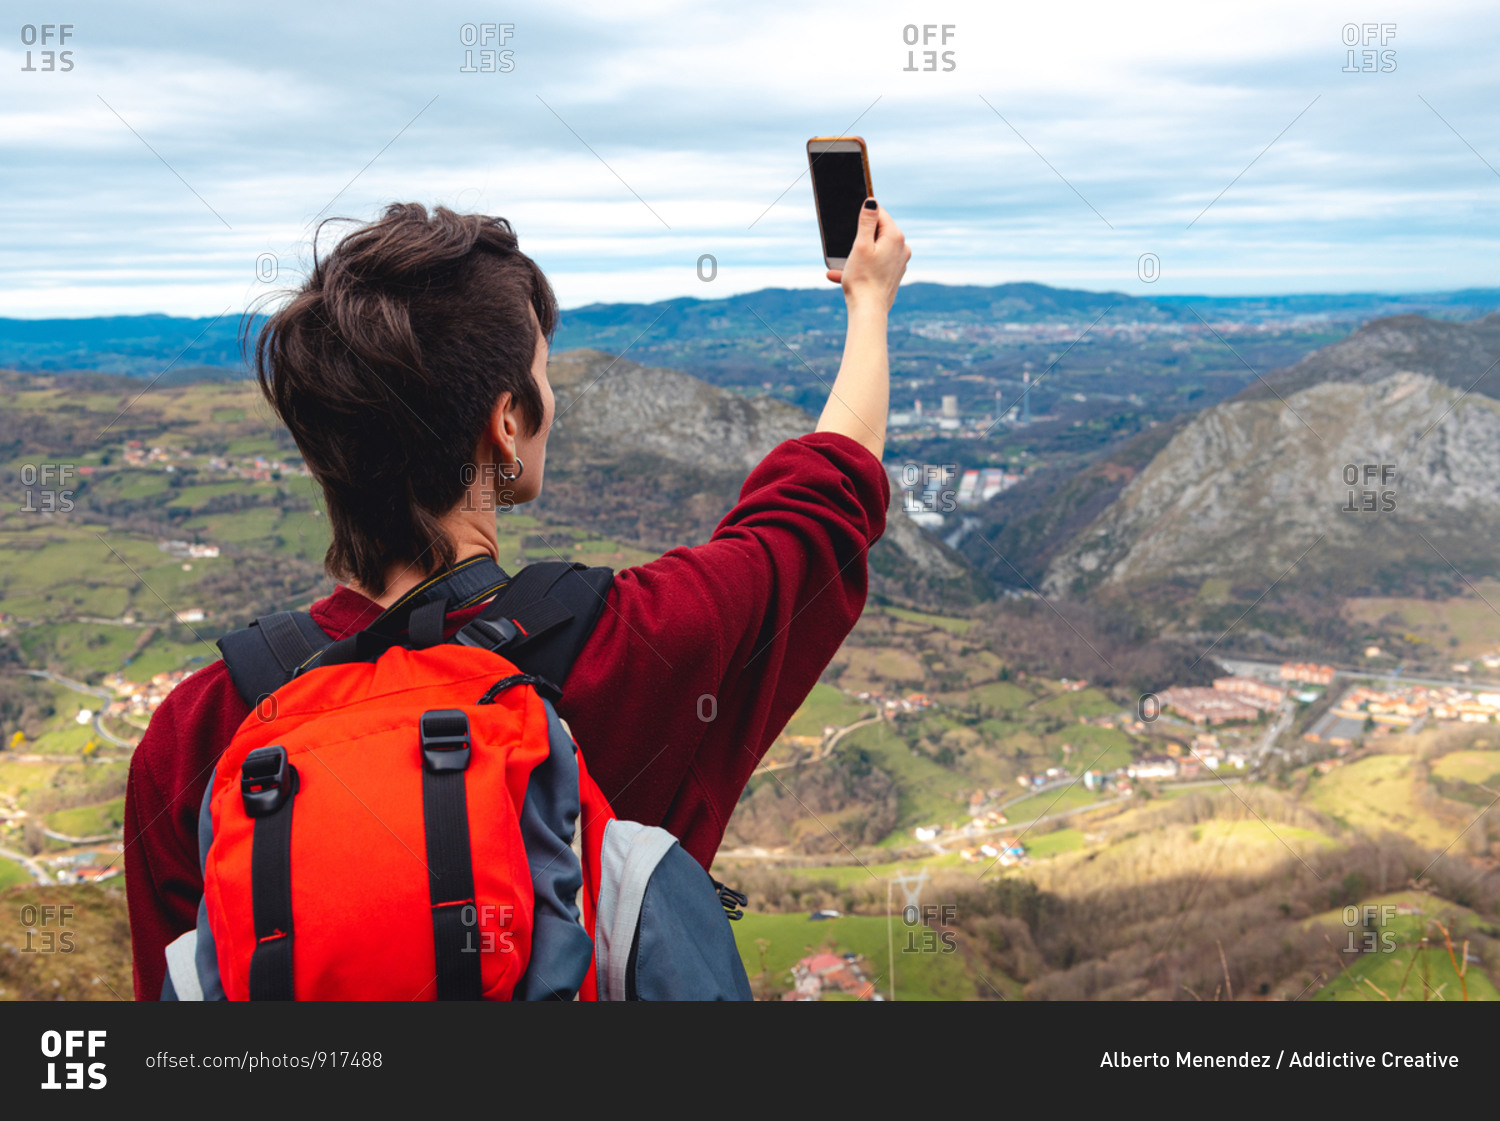 Back view of unrecognizable woman with backpack standing with arm raised and taking shot with smartphone of wonderful scenery with small villages and town in valley against foggy ridges at horizon under cloudy sky in Asturias